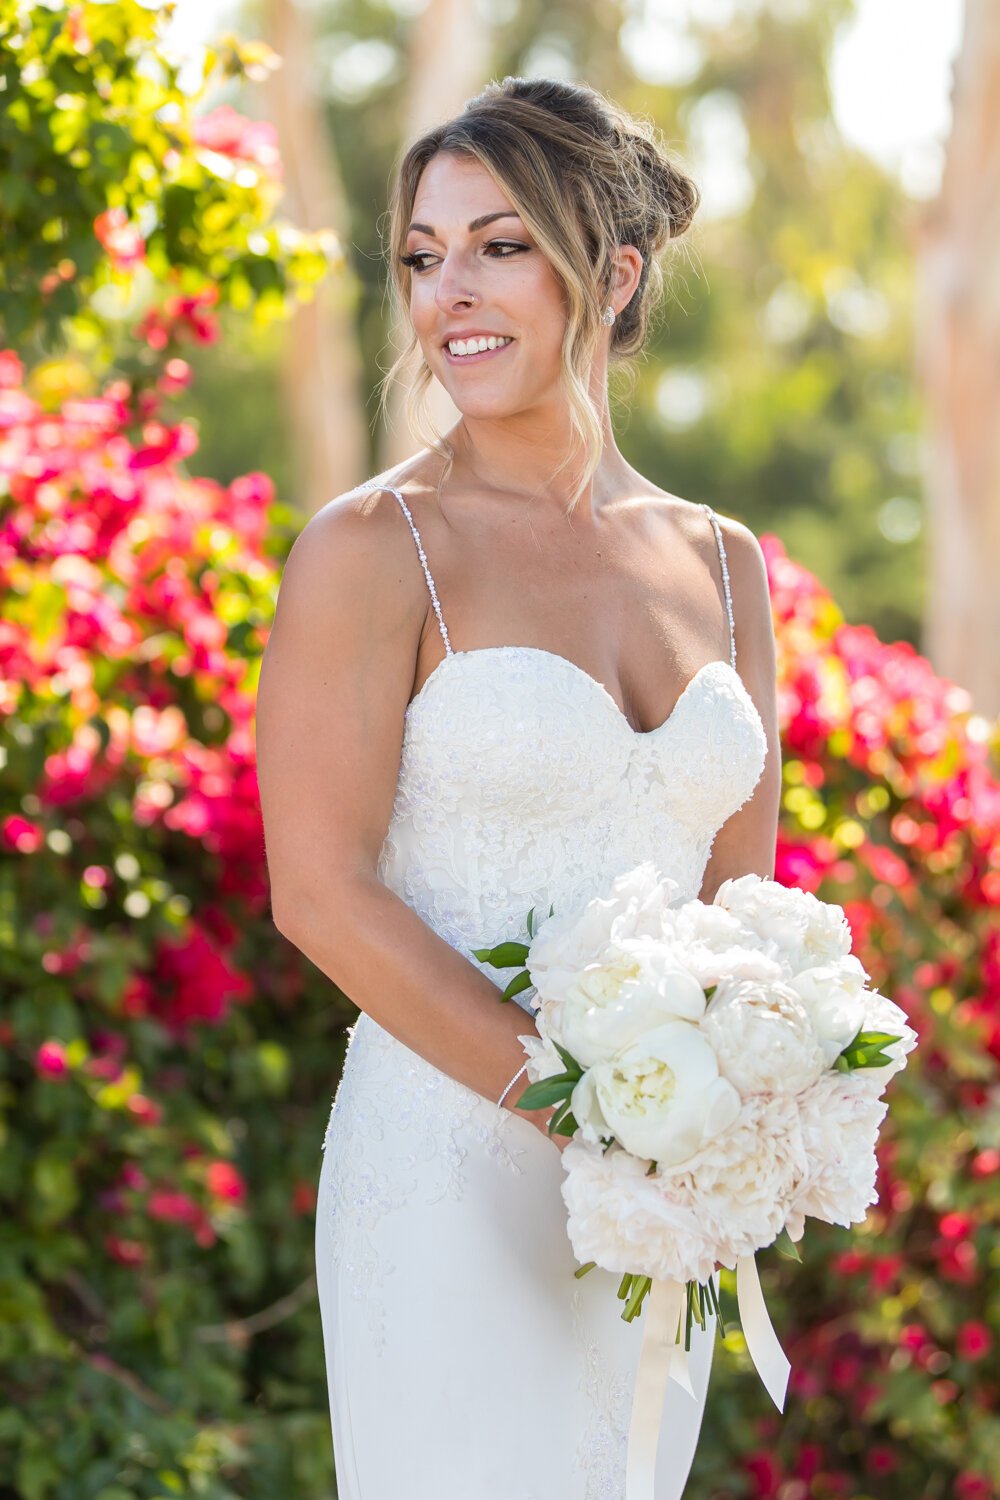 www.santabarbarawedding.com | Elizabeth Victoria | SB Wedding Coordinator | Pacwest Blooms | Enzoani | Cheek to Cheek Artistry | The Bustle | Bride with Bouquet in Front of Bright Pink Flowers